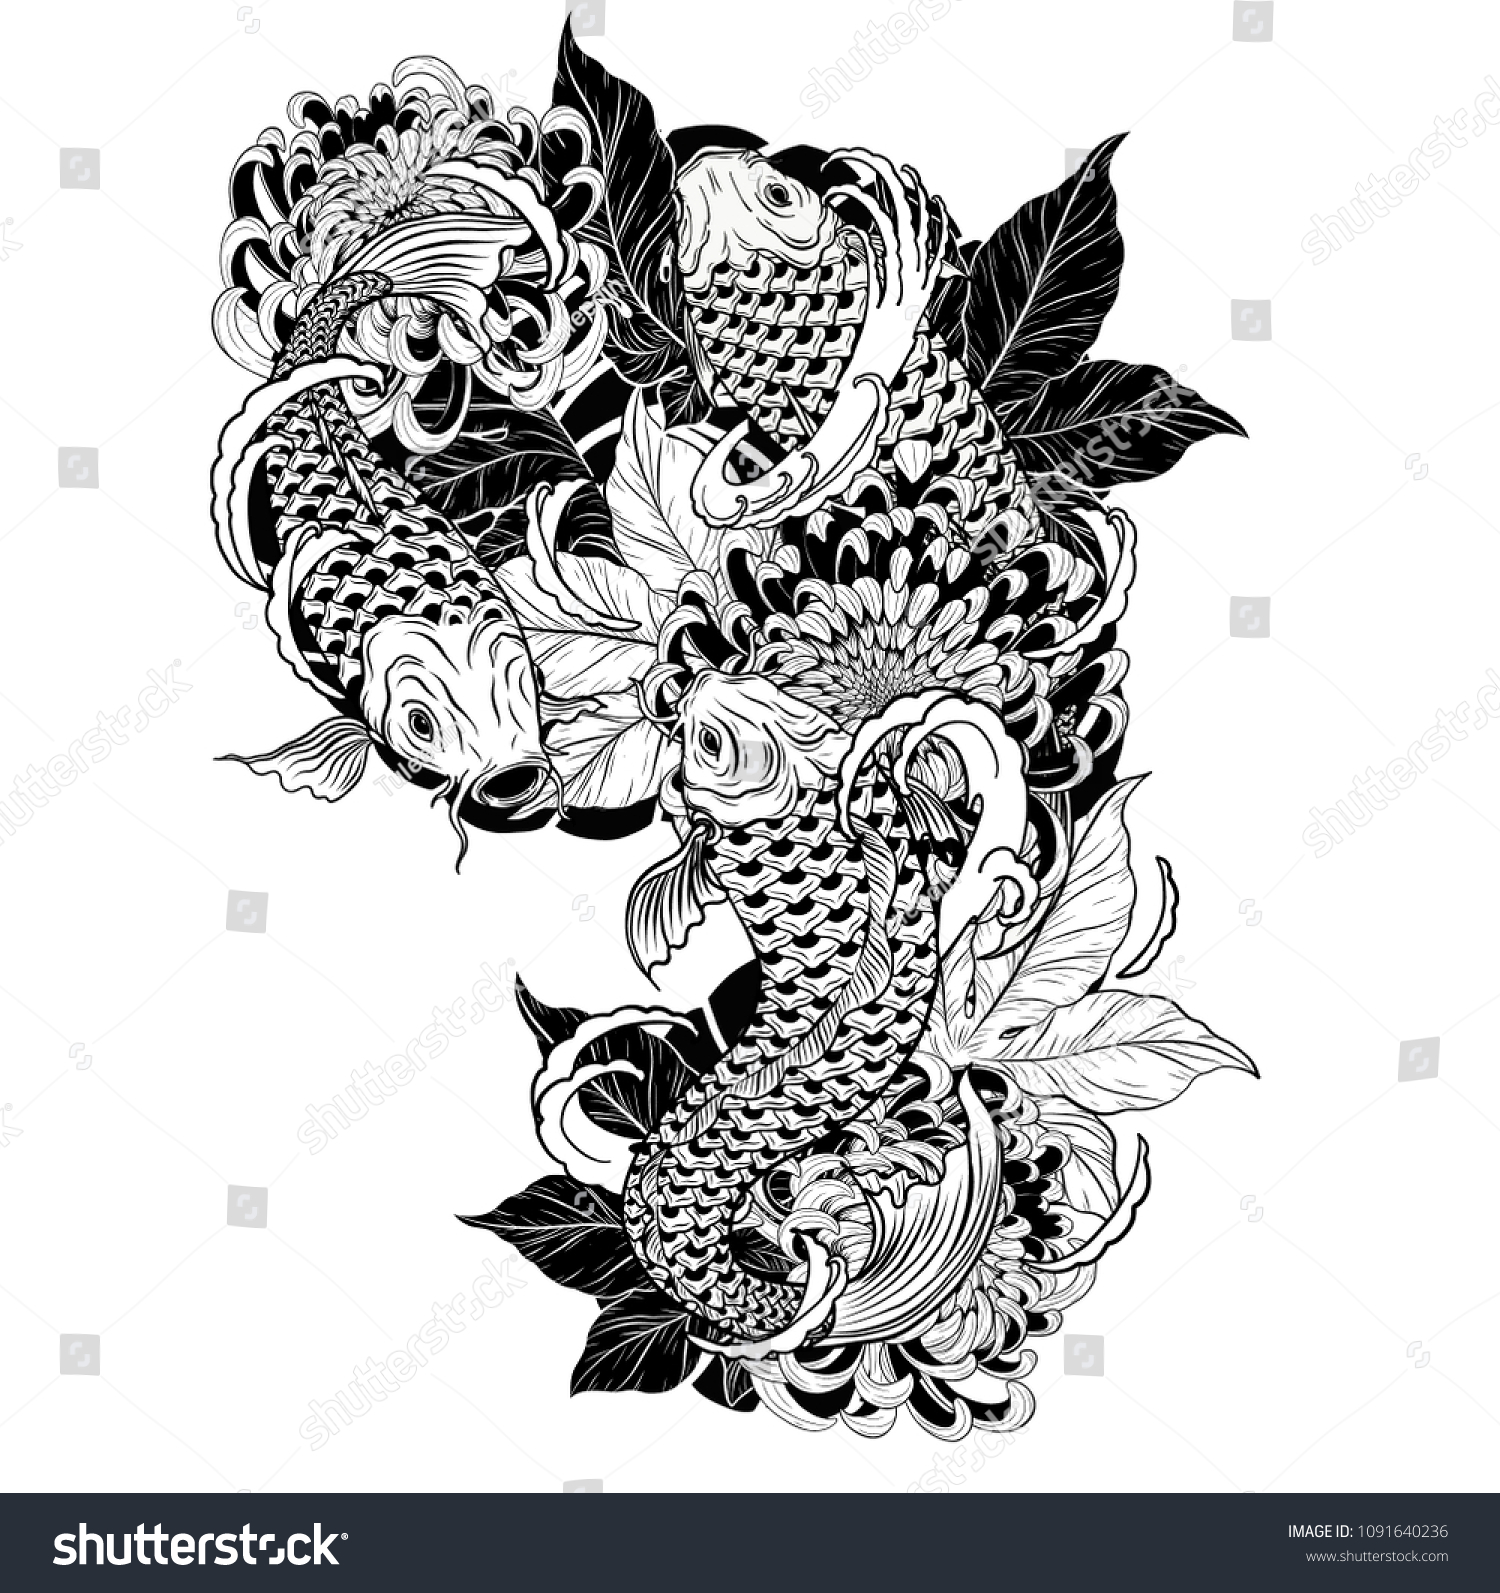 Carp fish and chrysanthemum tattoo by hand drawing.Tattoo art highly detailed in line art style. #1091640236